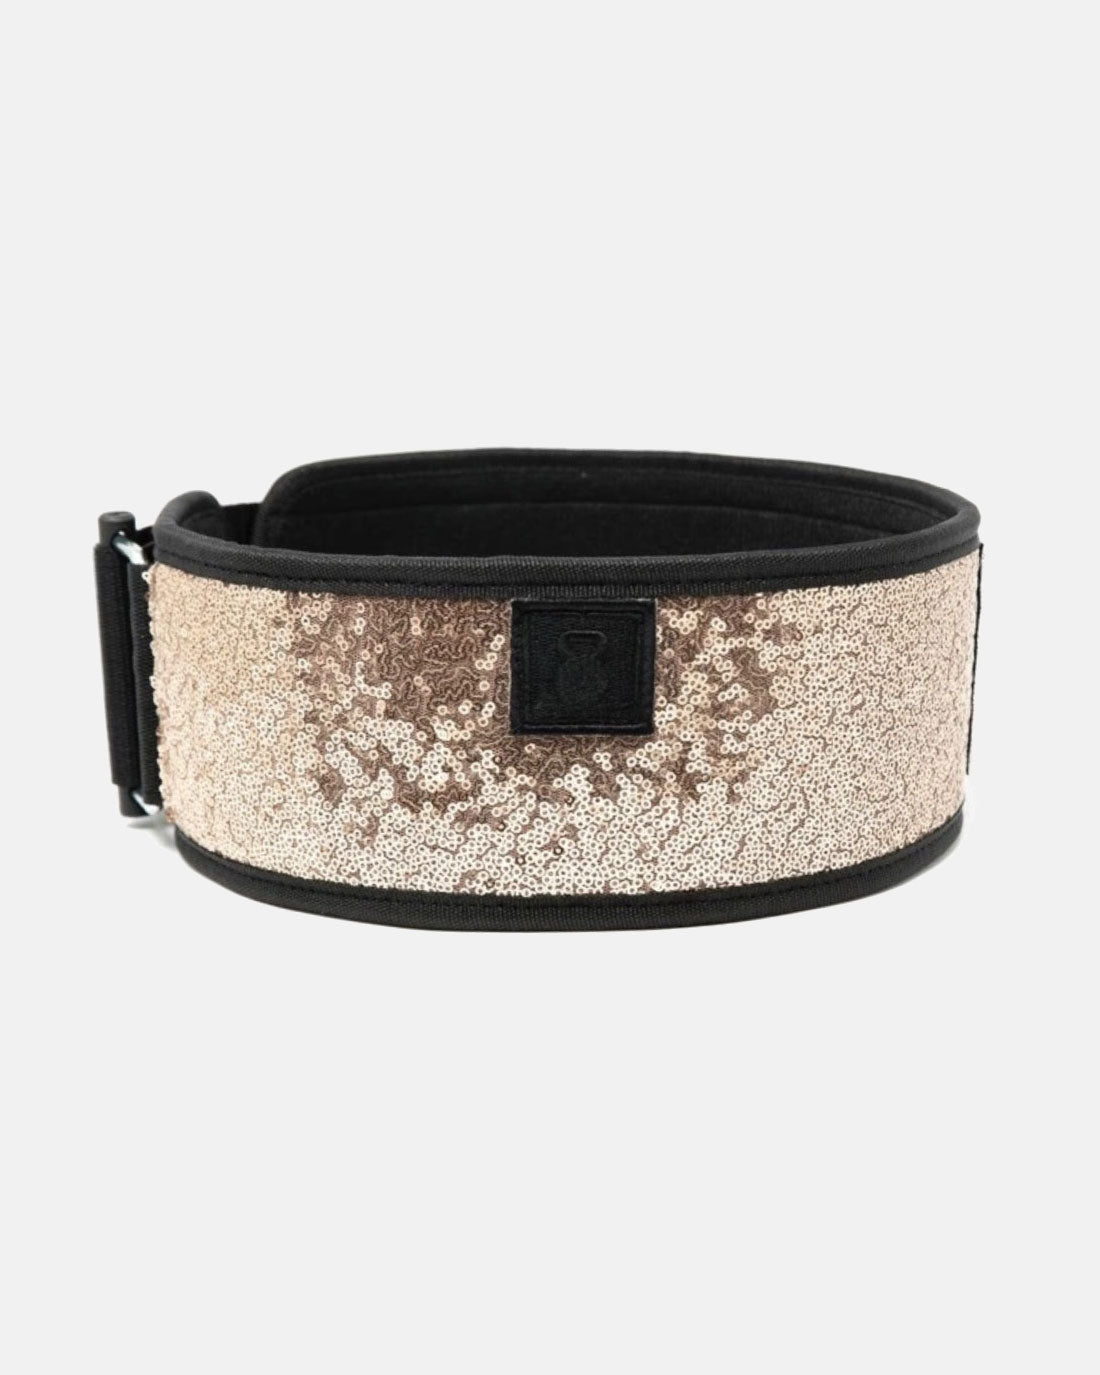 2pood weightlifting belt classy bling